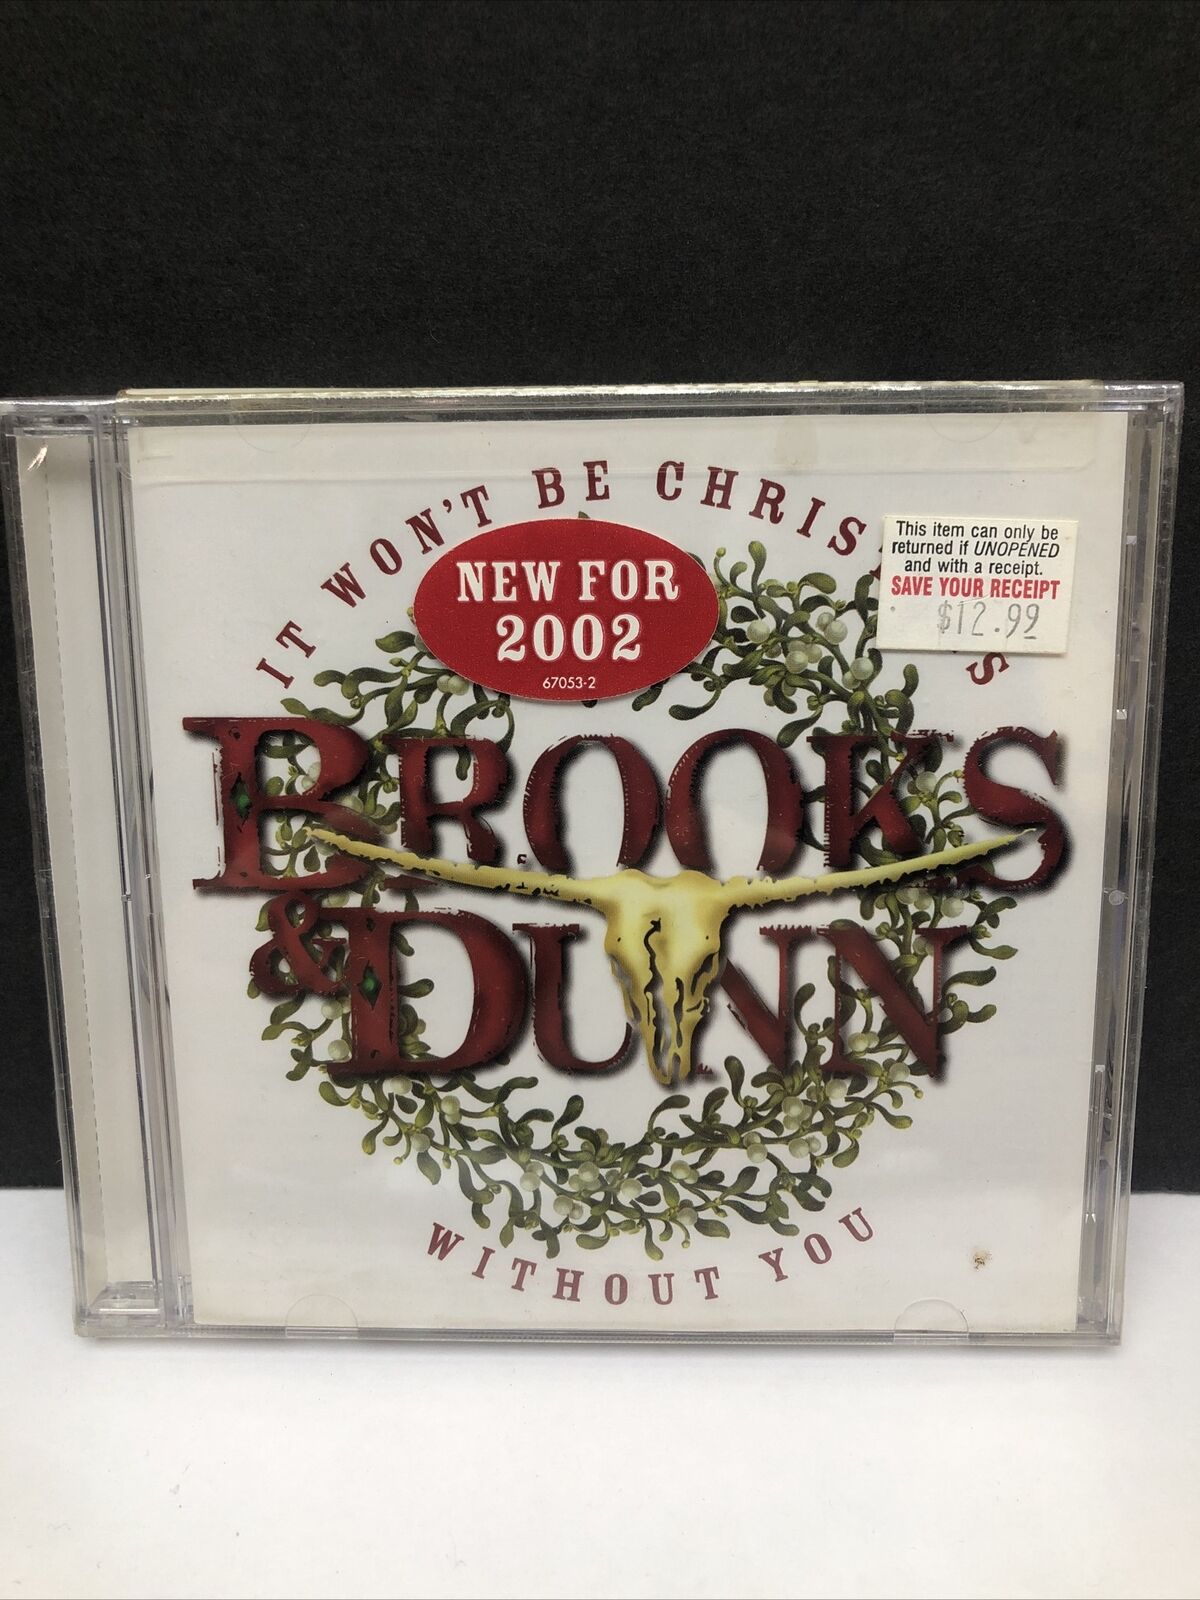 IT WON'T BE CHRISTMAS WITHOUT YOU  BROOKS & DUNN CD NEW SEALED 2002